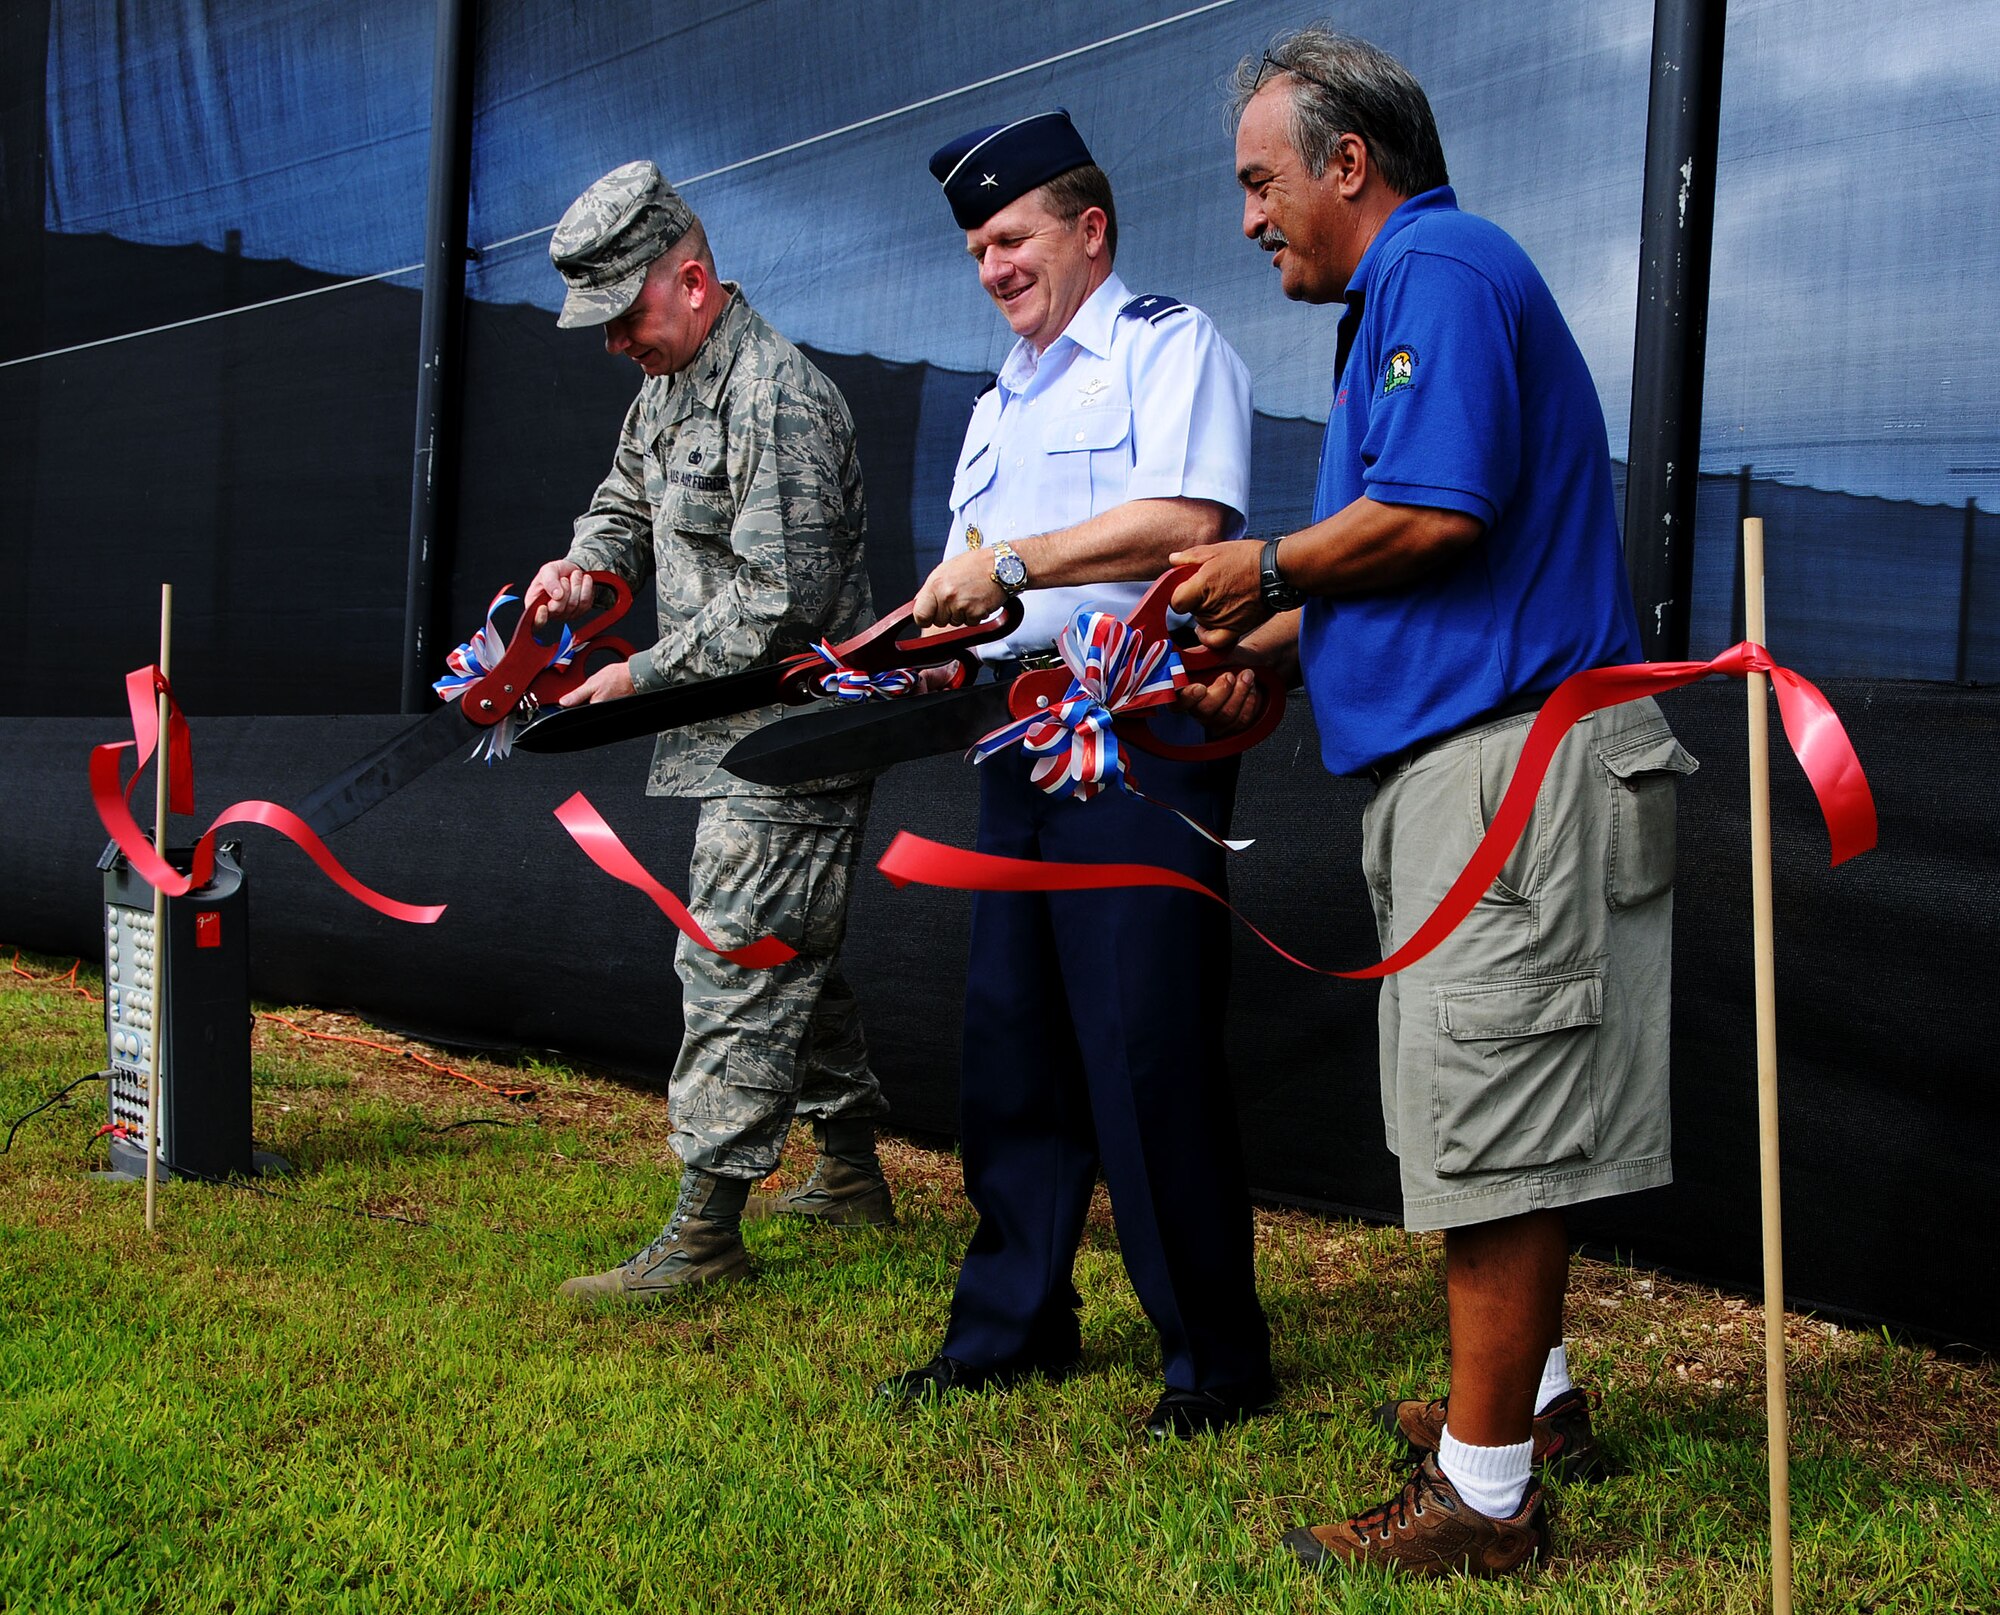 ANDERSEN AIR FORCE BASE, Guam - Colonel Mark Talley, Brig. Gen. Phil Ruhlman, and Ray Stiers cut the ribbon at the grand opening ceremony of the new paintball complex here Sept. 26. Construction on the facility began in January. (U.S. Air Force photo by Airman 1st Class Courtney Witt)